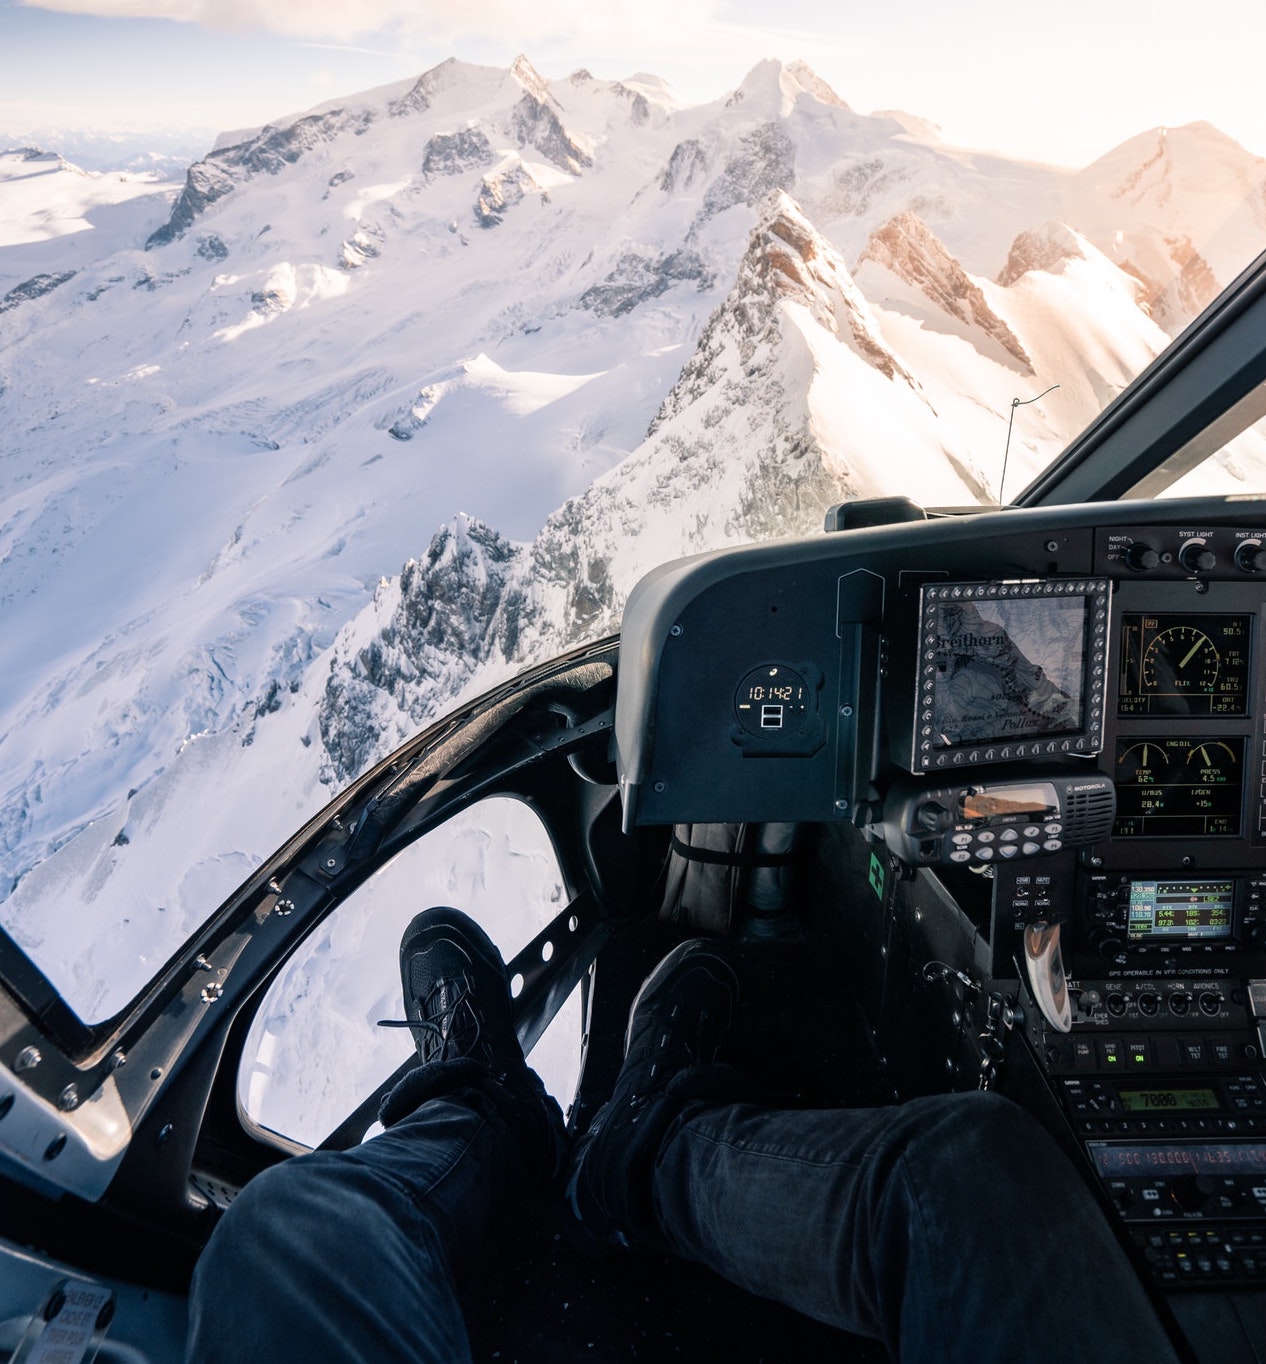 10 Considerations Before You Take a Helicopter Tour